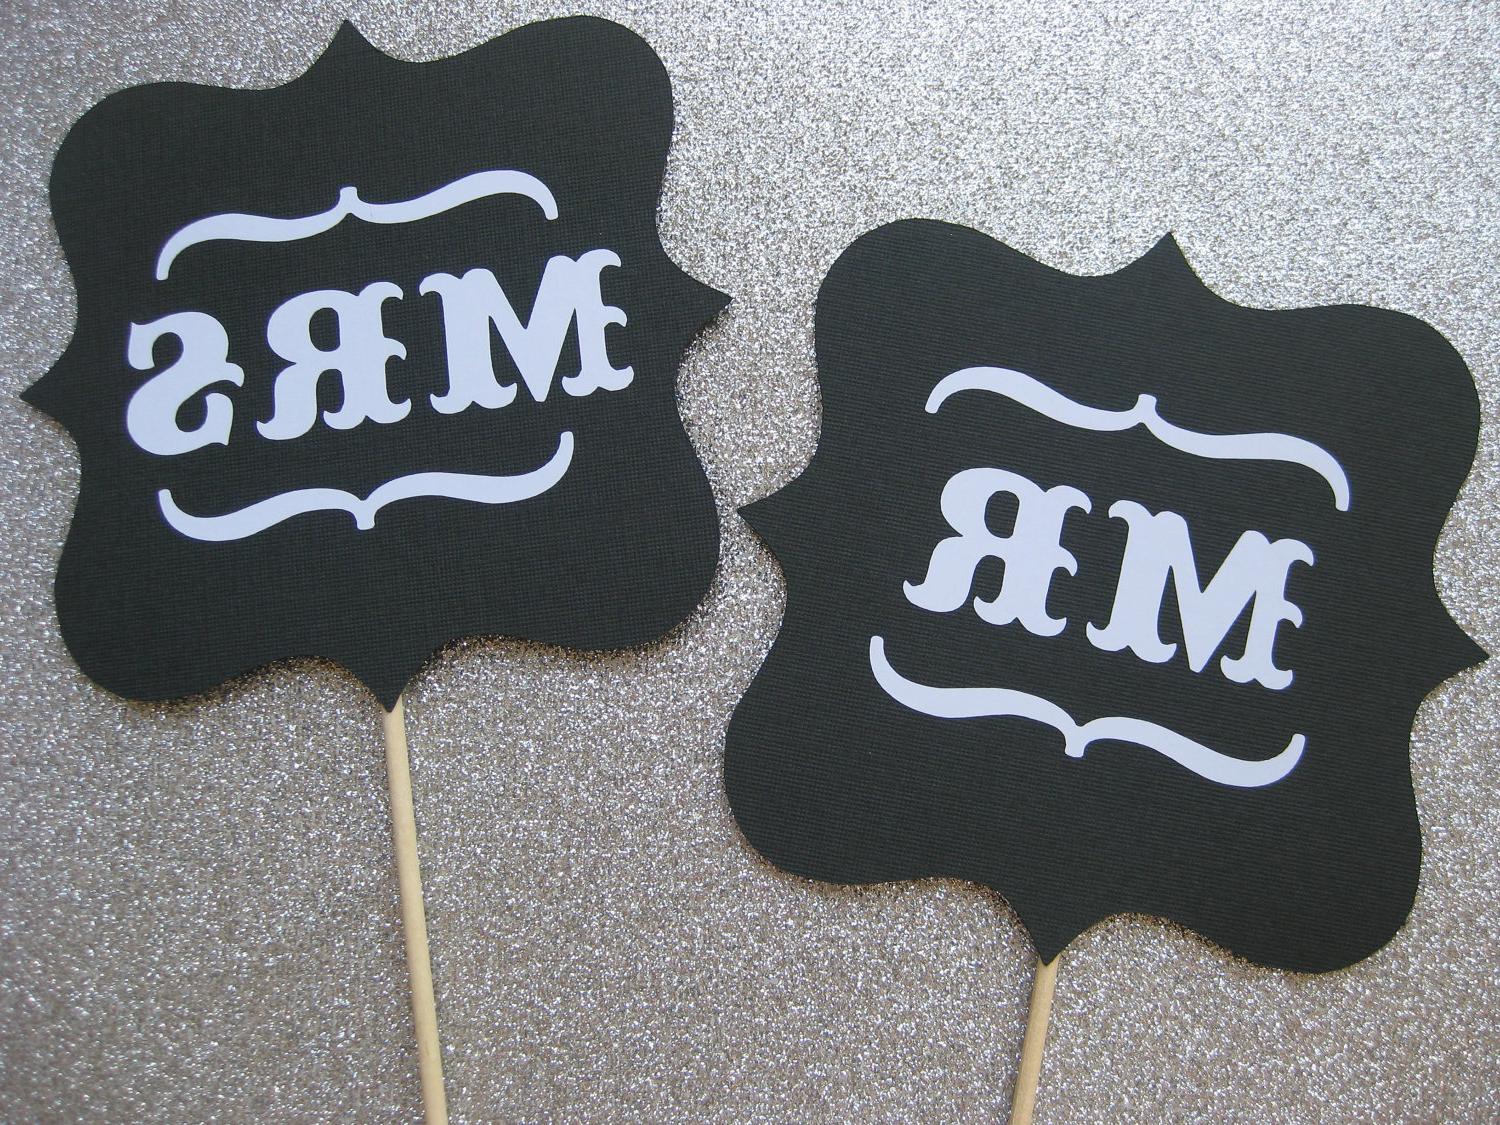 Mr and Mrs Wedding Signs